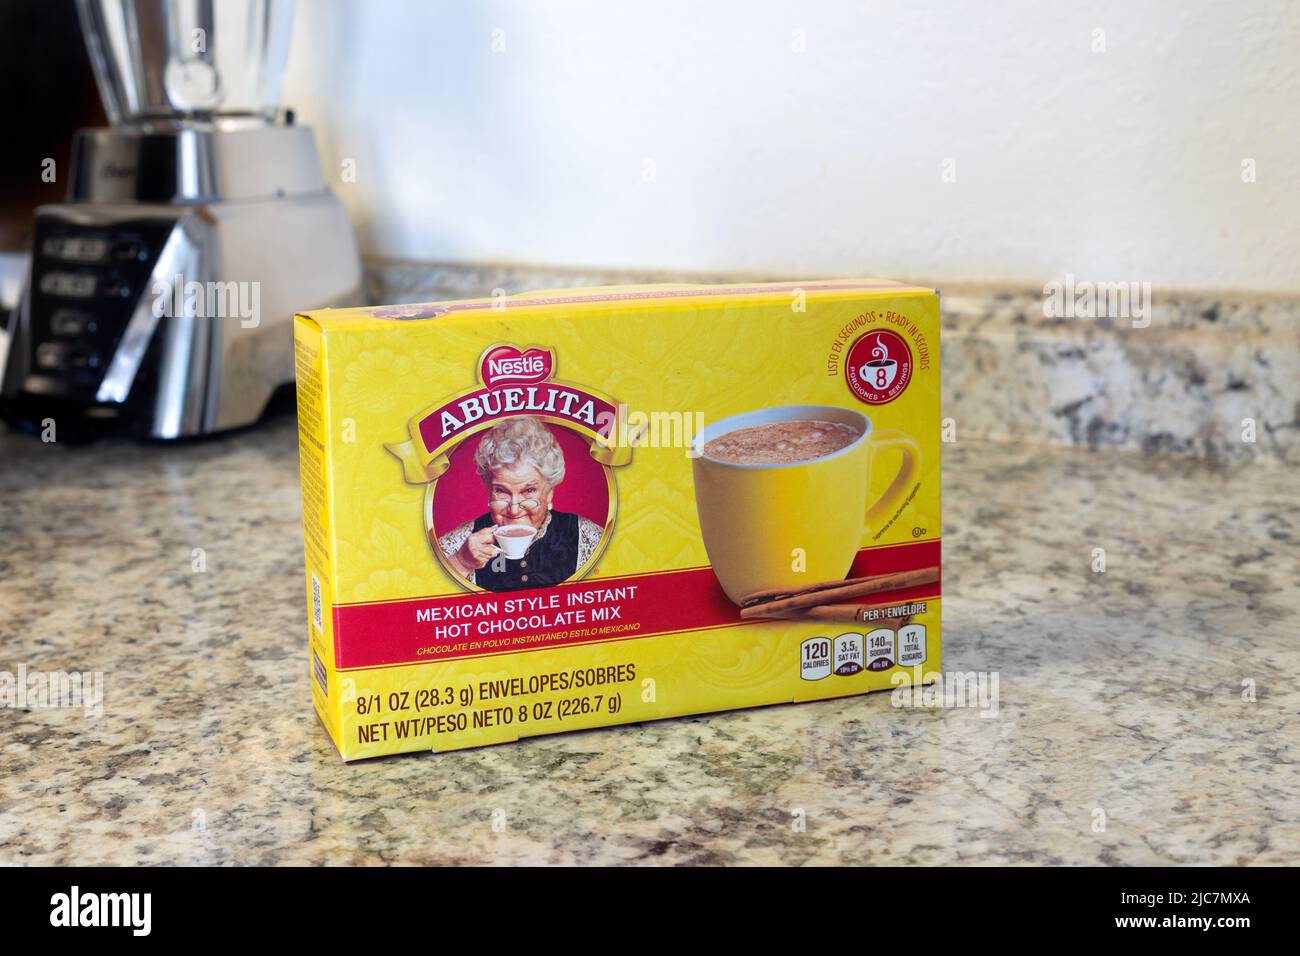 Victorville, CA, USA – June 10, 2022: A box of Nestle Abuelita Mexican style instant hot chocolate mix on a kitchen countertop. Stock Photo